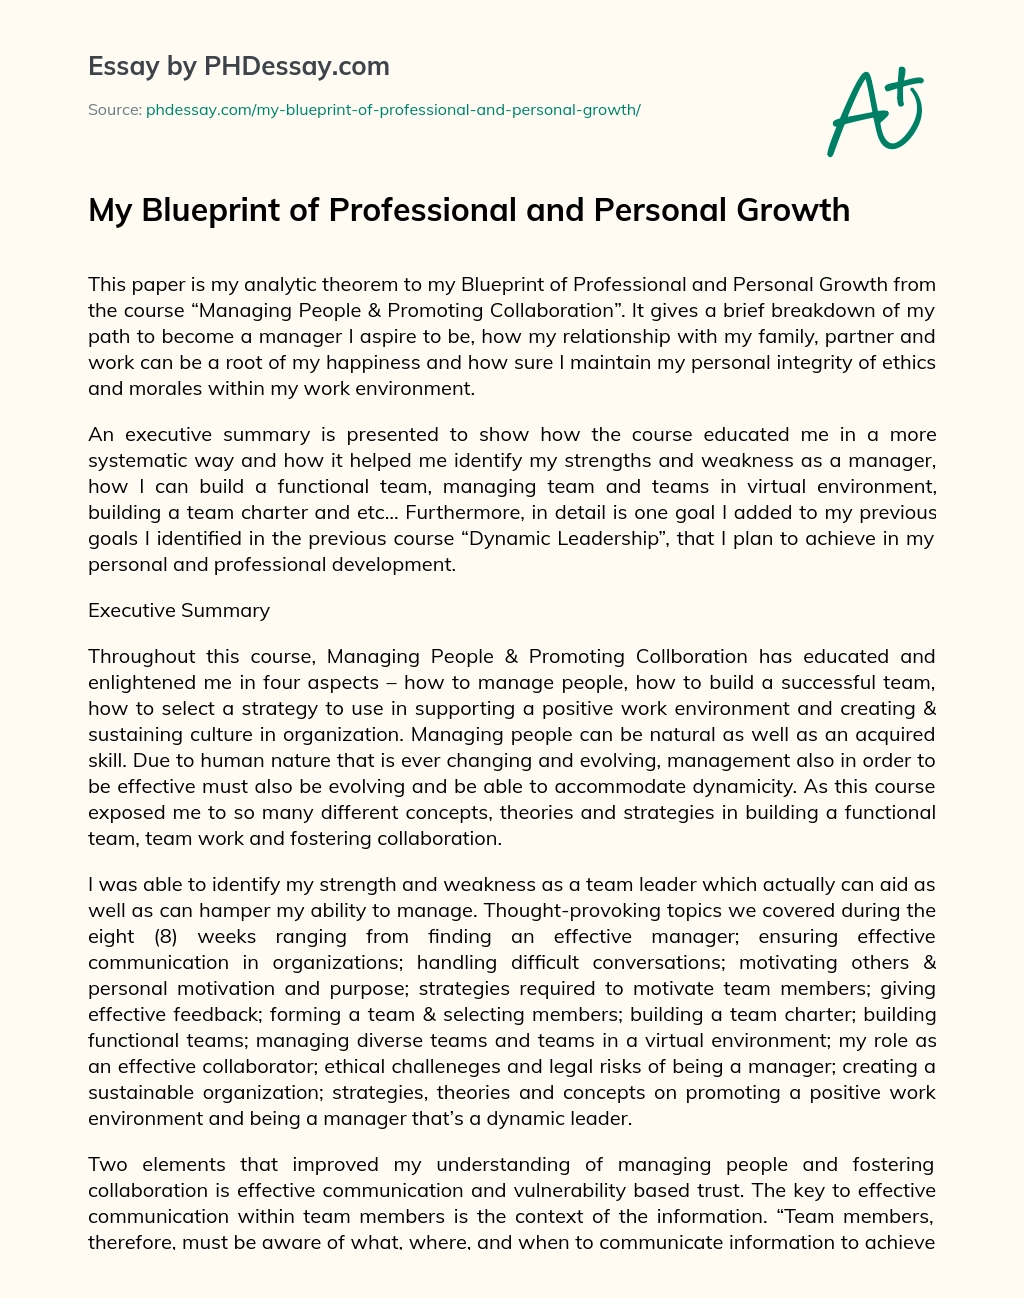 My Blueprint of Professional and Personal Growth essay